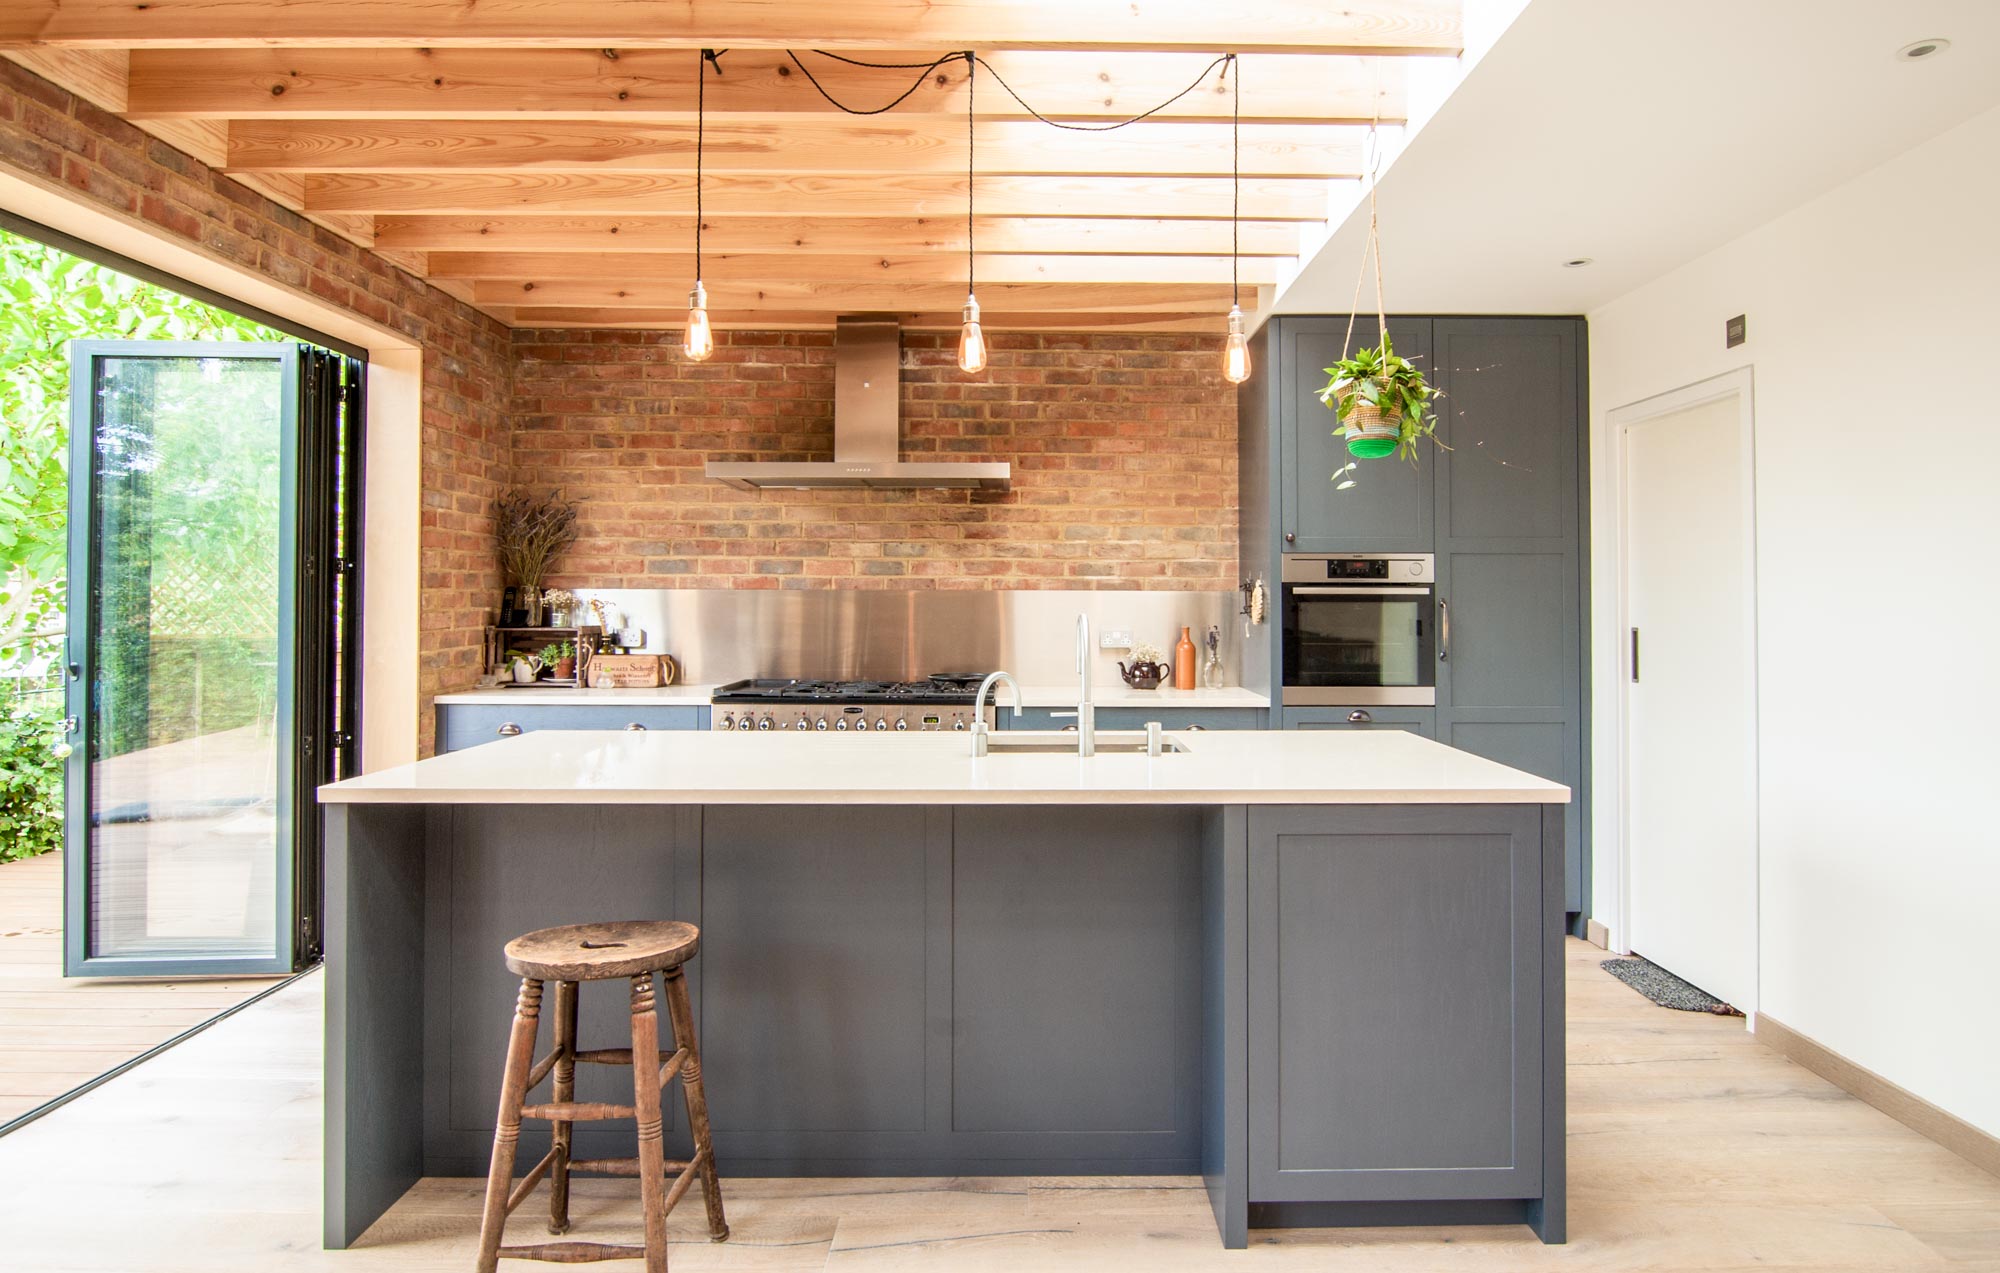 Exposed brick walls and timber beams in the new kitchen extension.